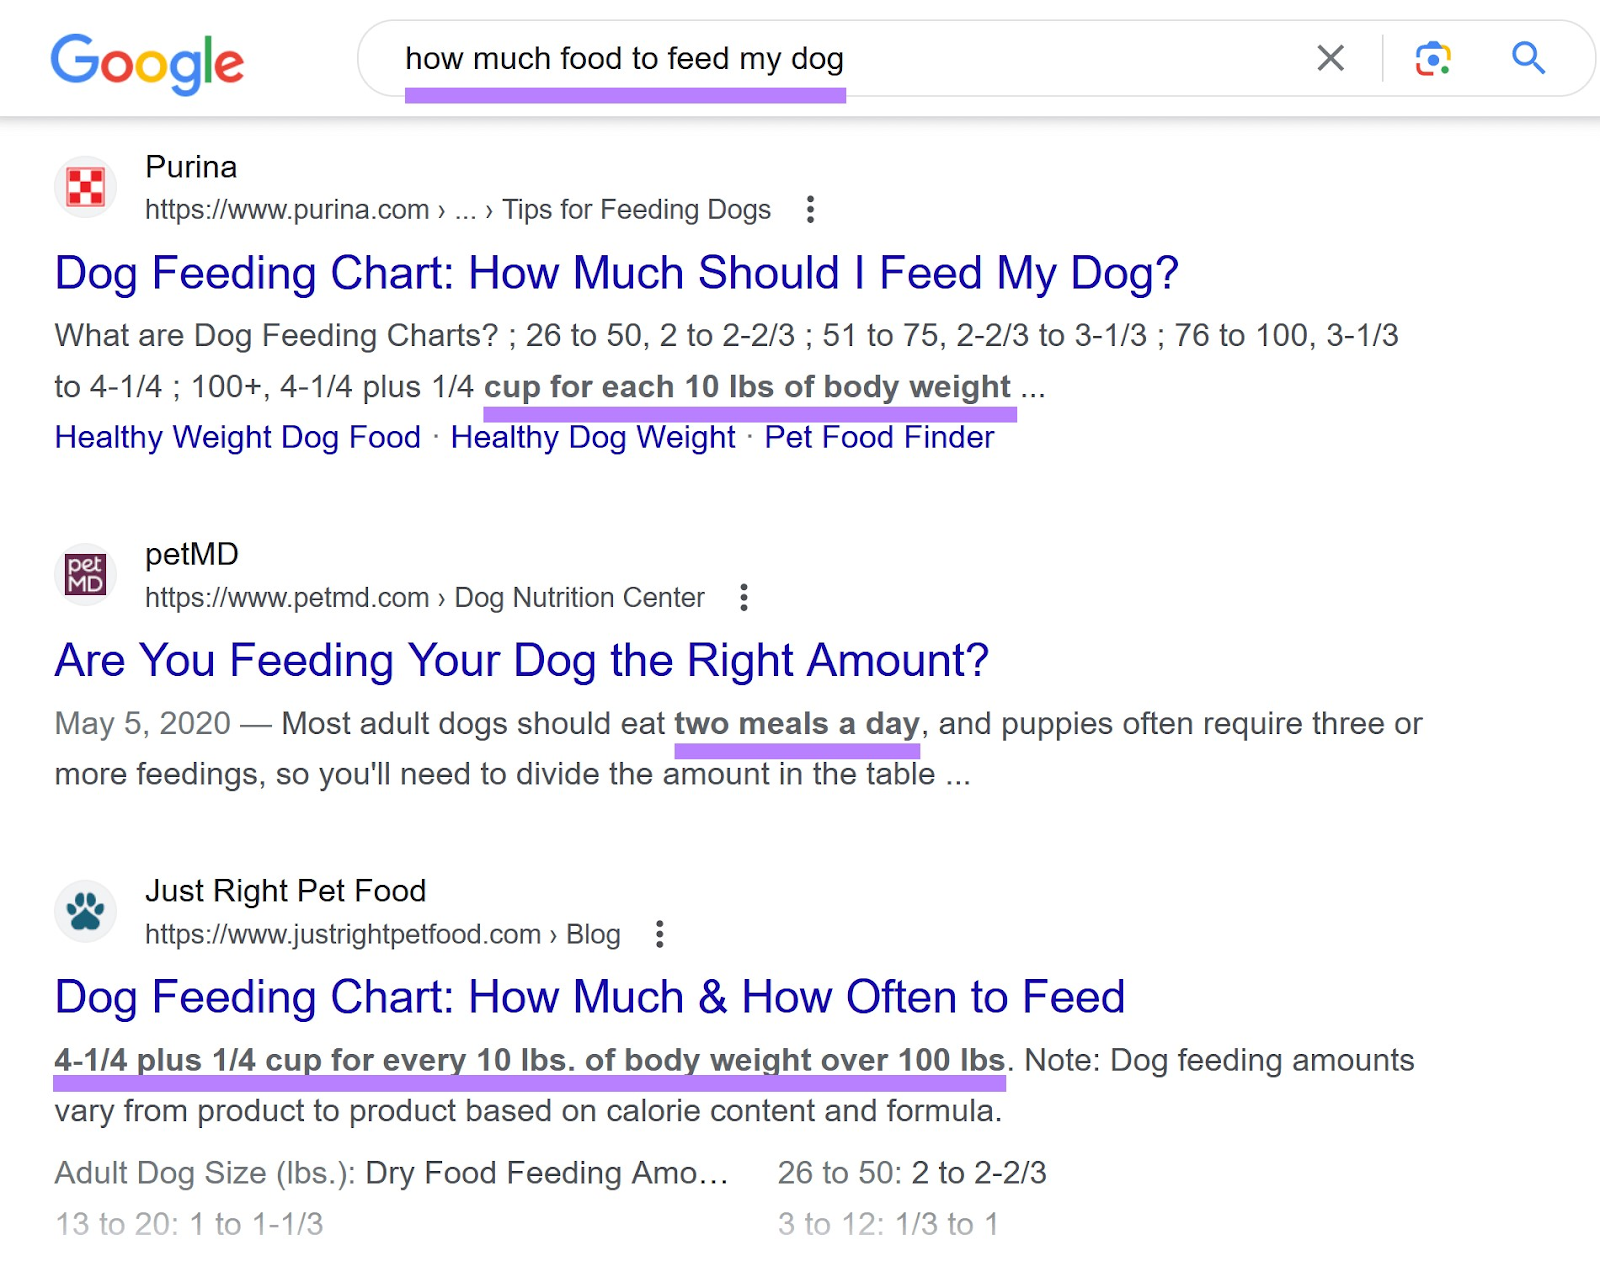 Google SERP for “how much food to feed my dog”